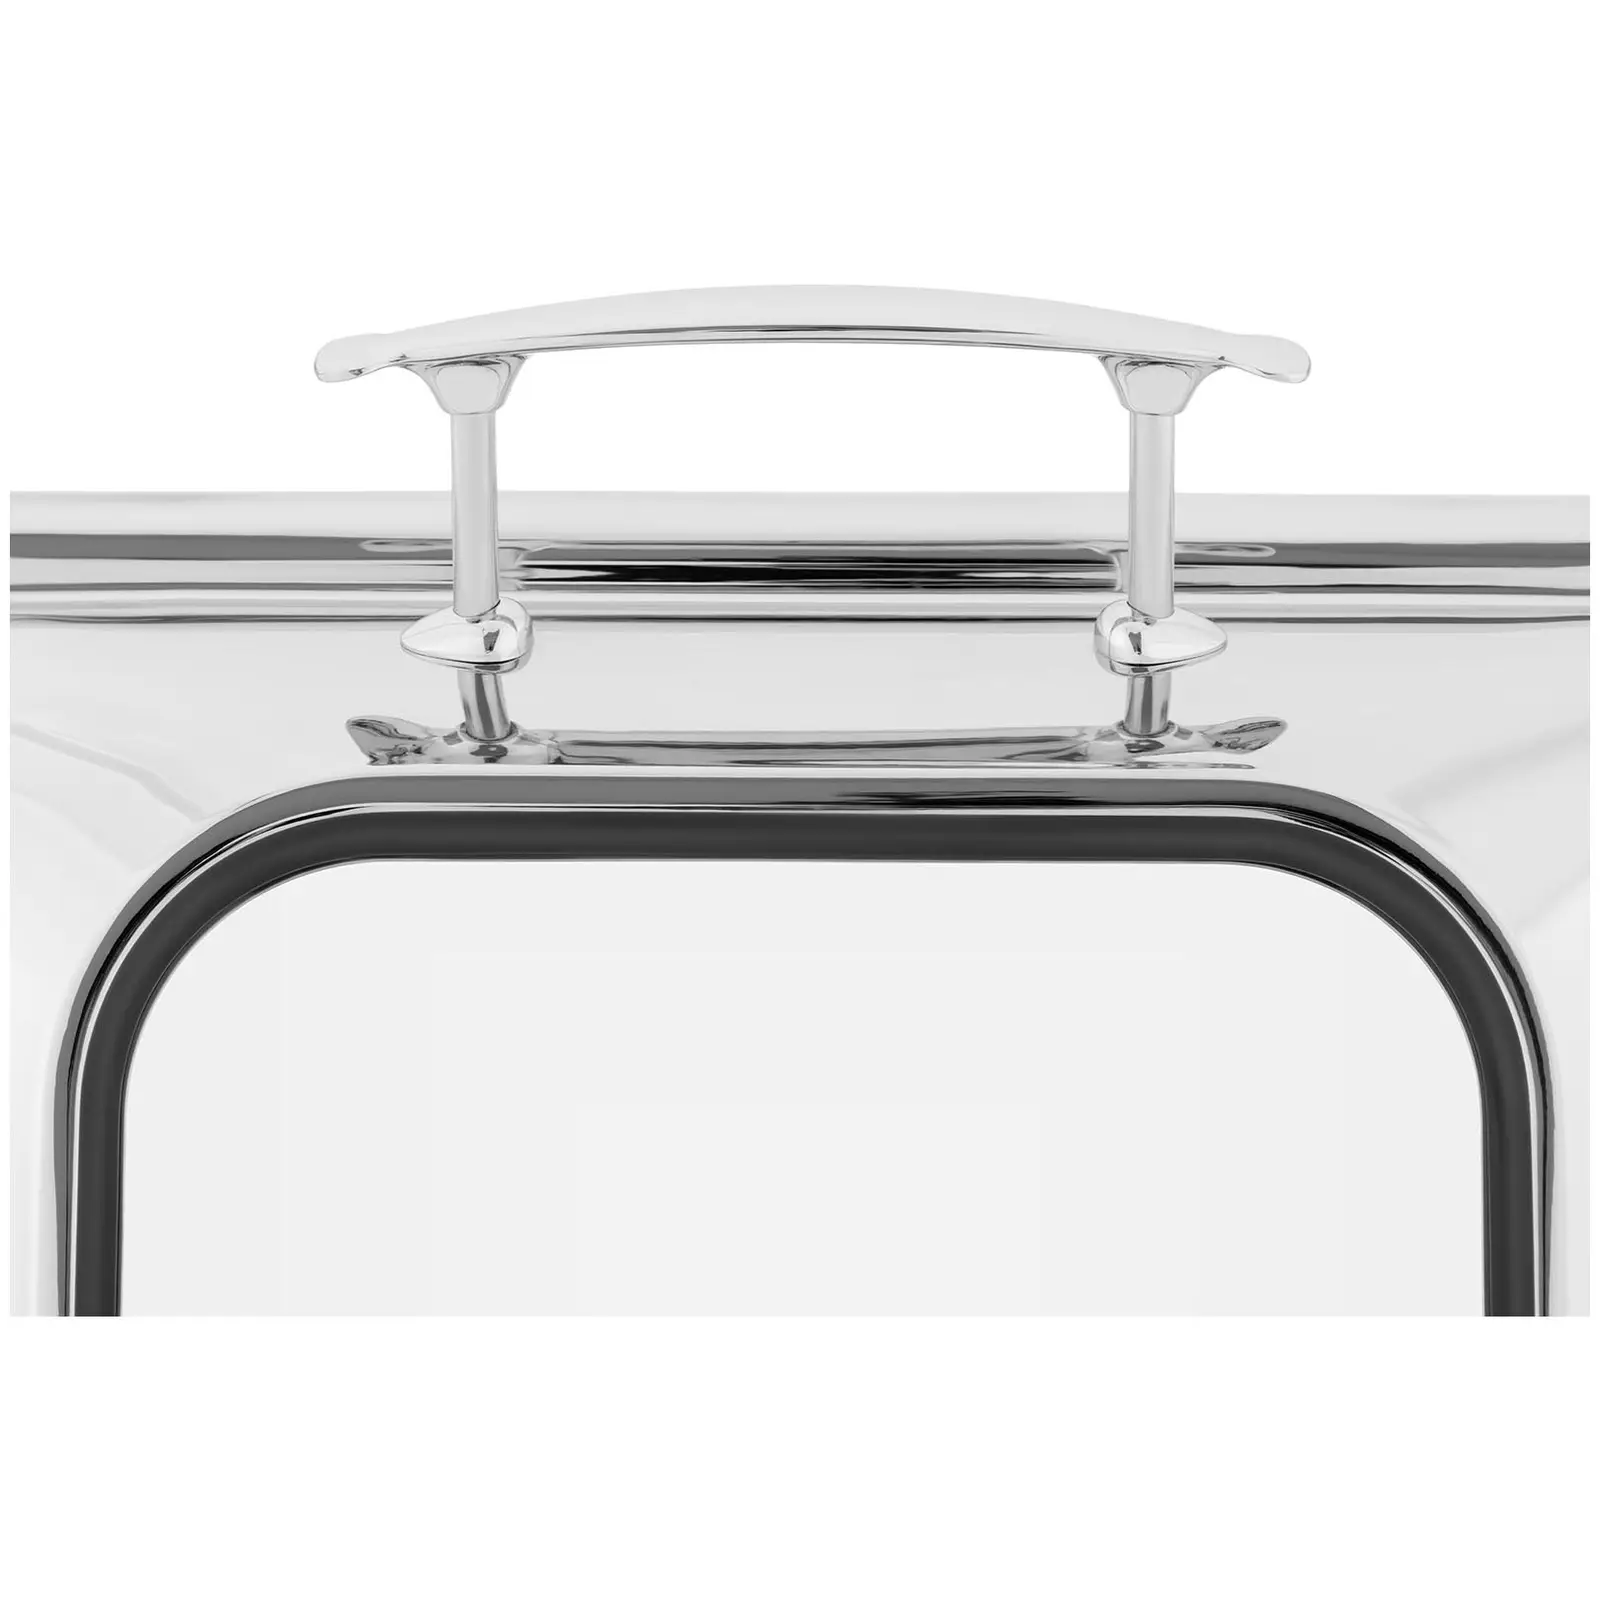 Chafing dish - GN 2/3 - Royal Catering - 5,3 L - Lock med fönster